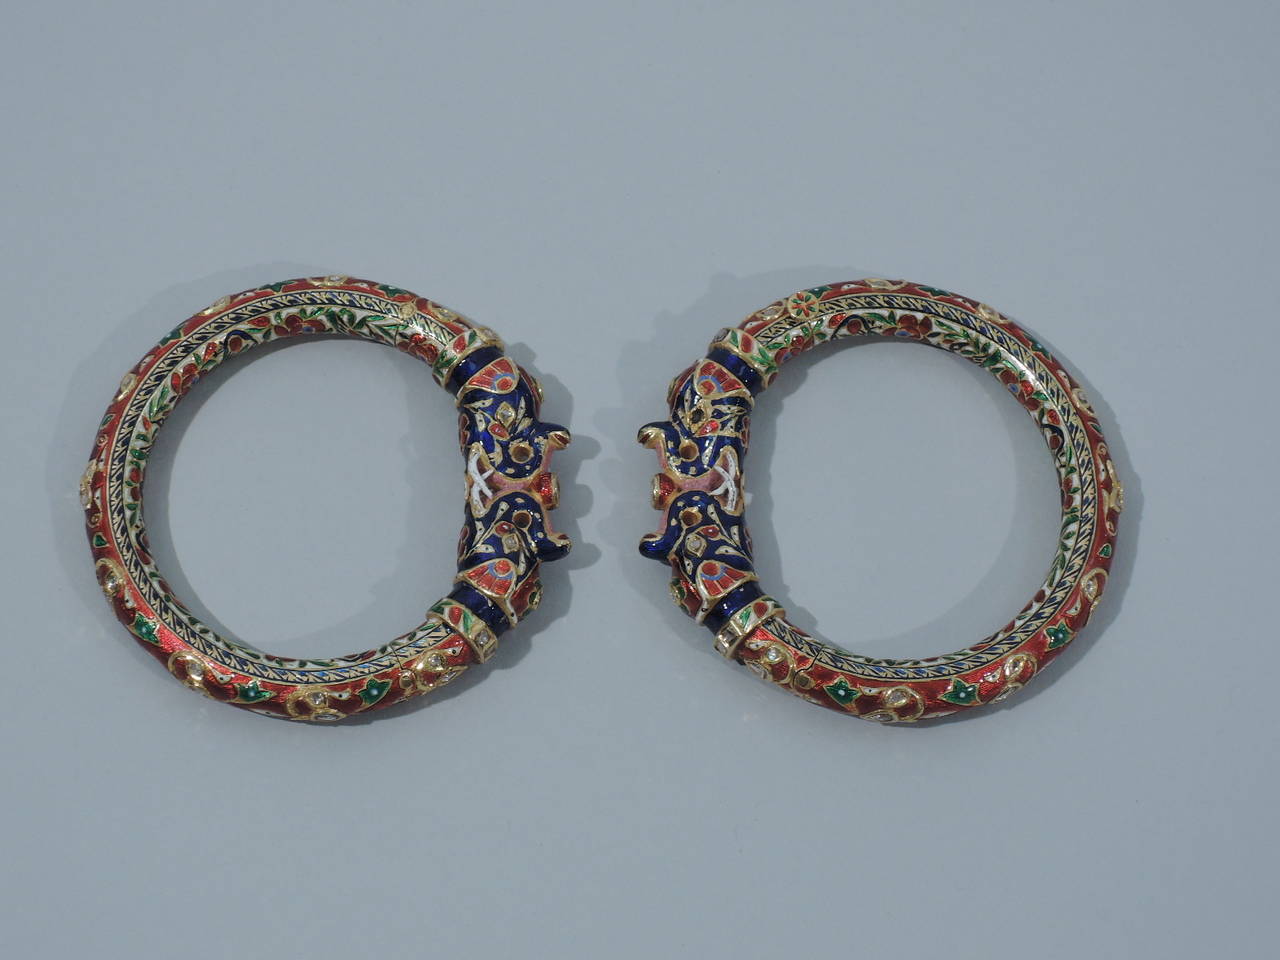 A spectacular pair of 22K gold and enamel elephant-head bangle bracelets decorated with deep red, blue, and green enamel and rose-cut diamonds. Made in Jaipur, India, ca. 1880. Provenance: formerly in the collection of the Maharani of Jaipur.